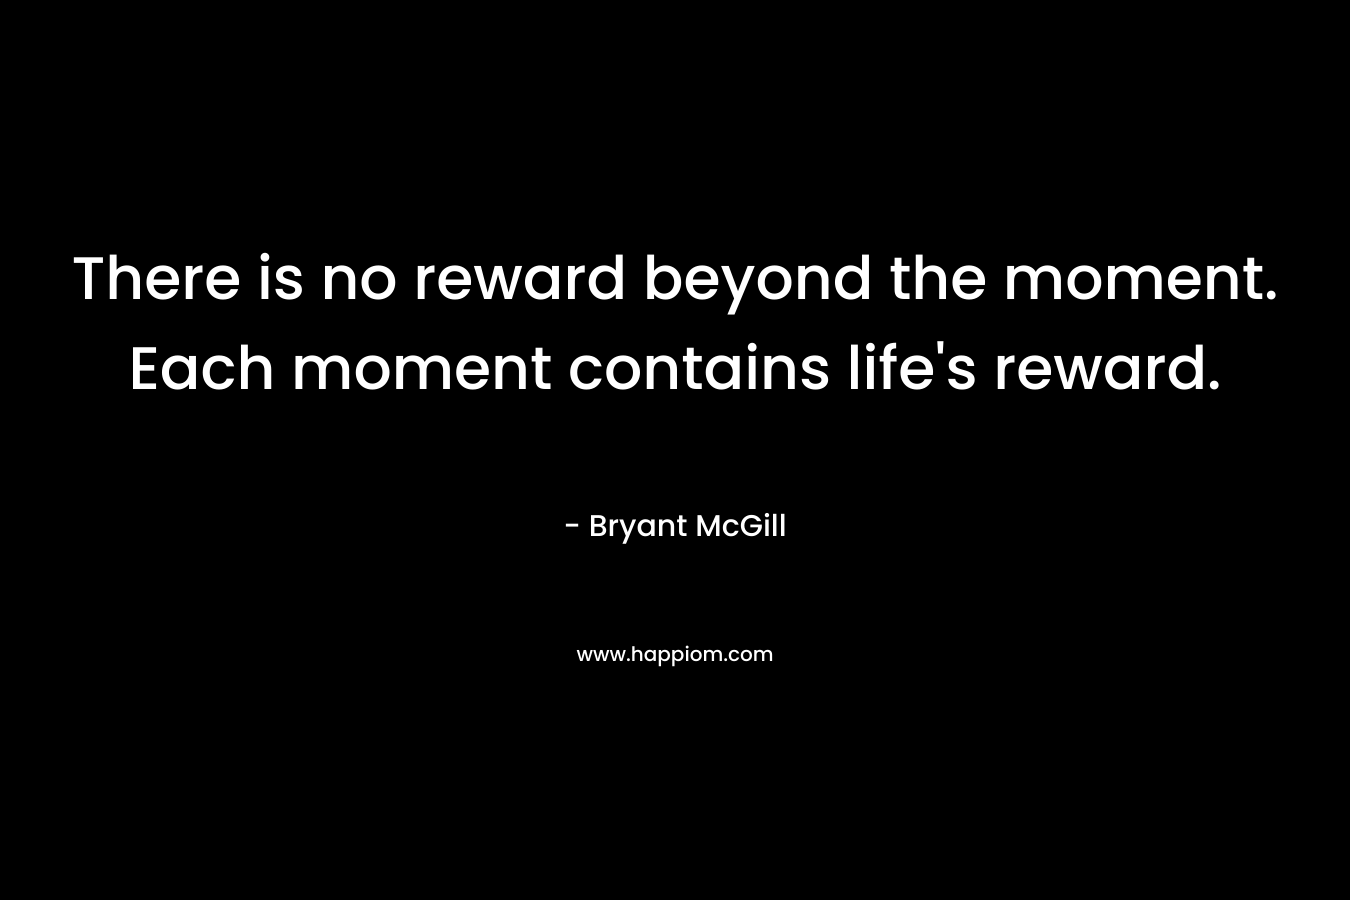 There is no reward beyond the moment. Each moment contains life's reward.